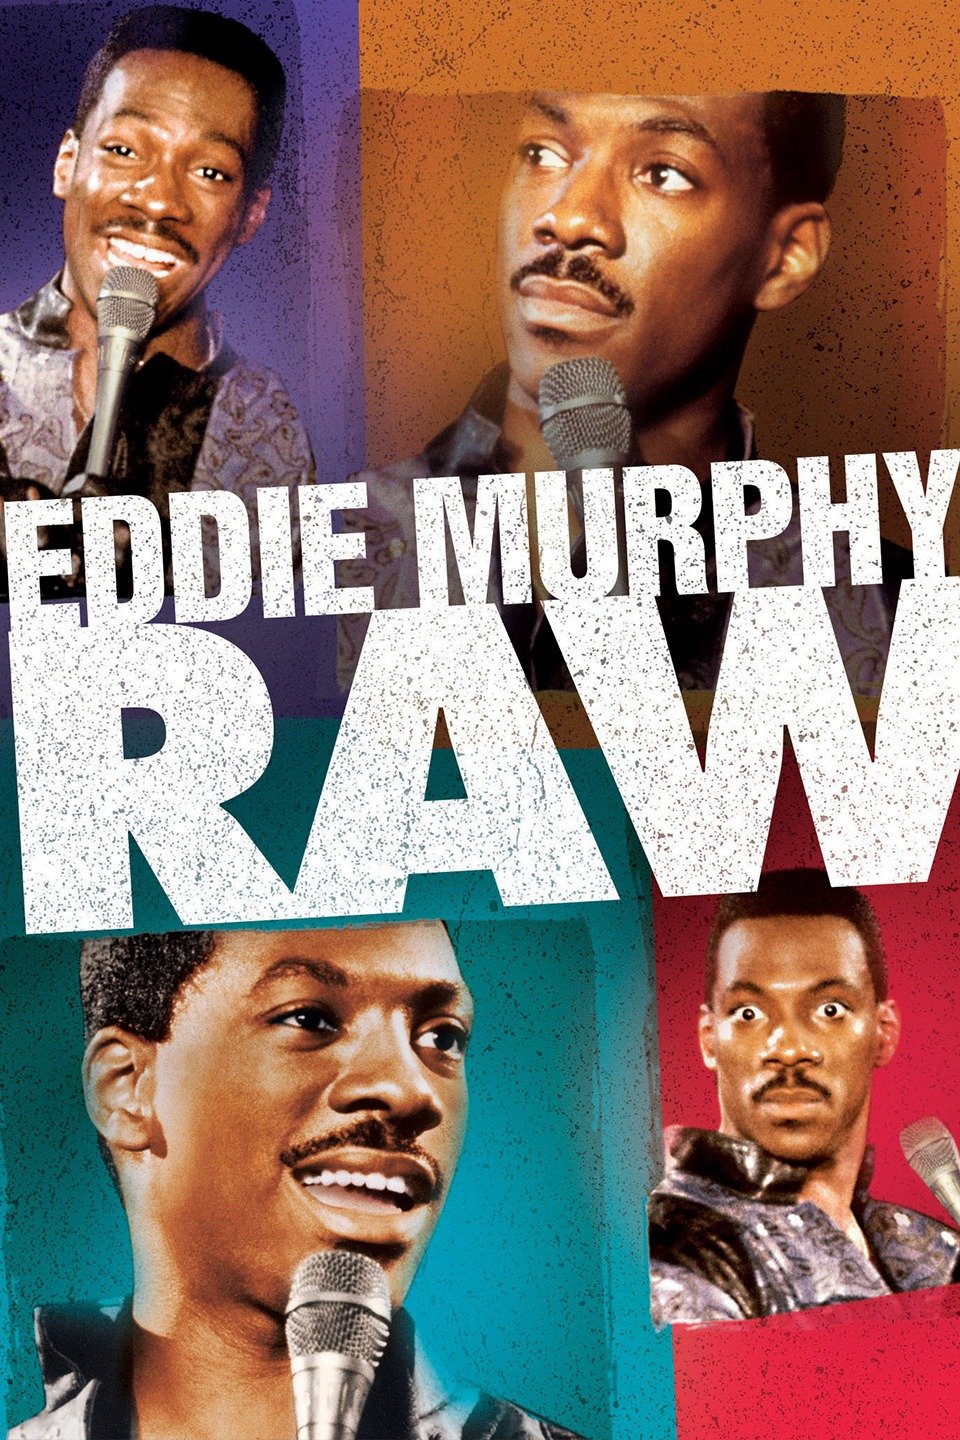 Stand Up Its Comedy; Eddie Murphy - Raw